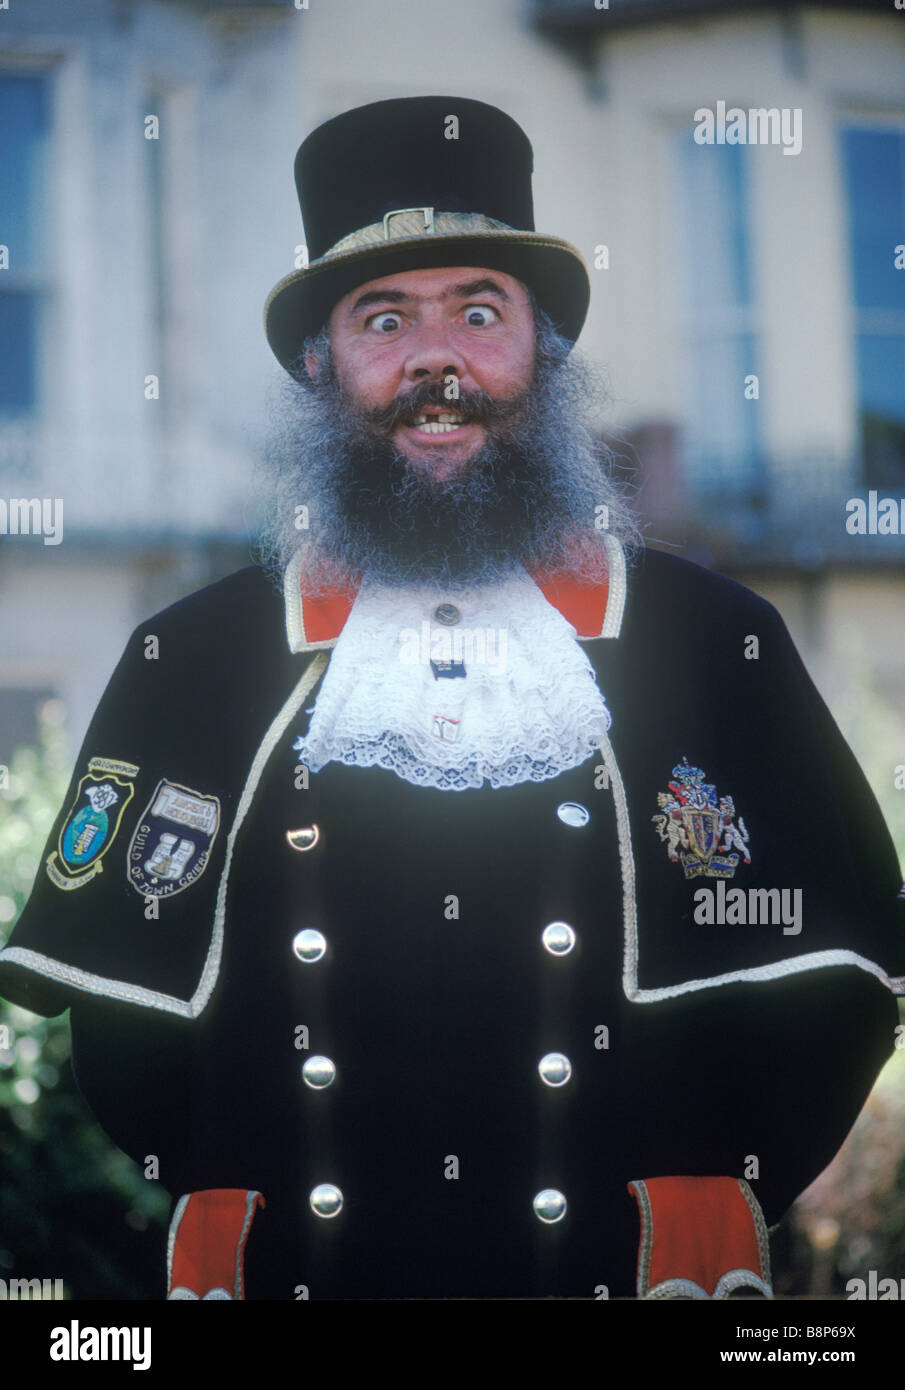 Man with scary face and staring  eyes. Town CrIer Hastings East Sussex  HOMER SYKES Stock Photo